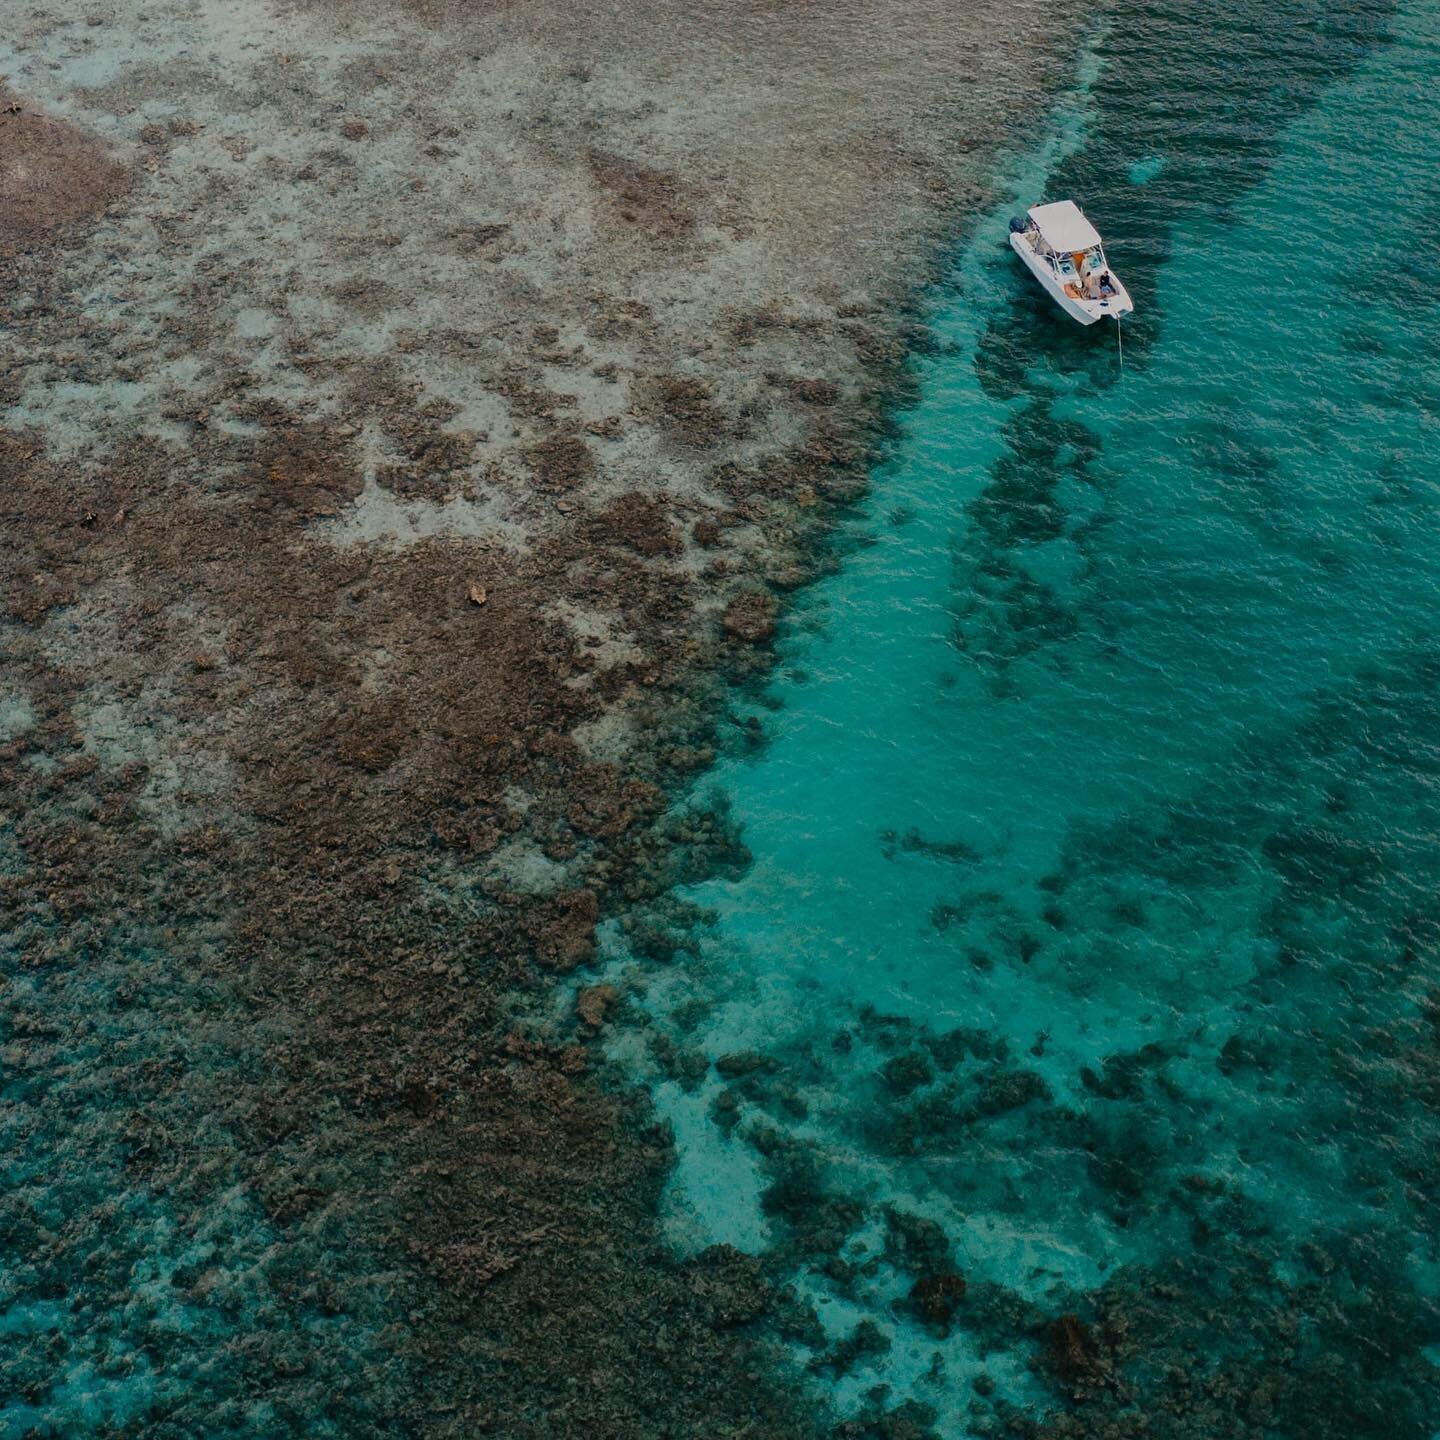 A view from above of one of our favorite coves. 

#charter #charterboat #vacation #usvi #vi #bvi #stjohn #stthomas #visitusvi #vacationgoals #passionpassport #caribbean #caribbeanvacation #boating #worldcat #virginislands #yamahaoutboards #explore-mo